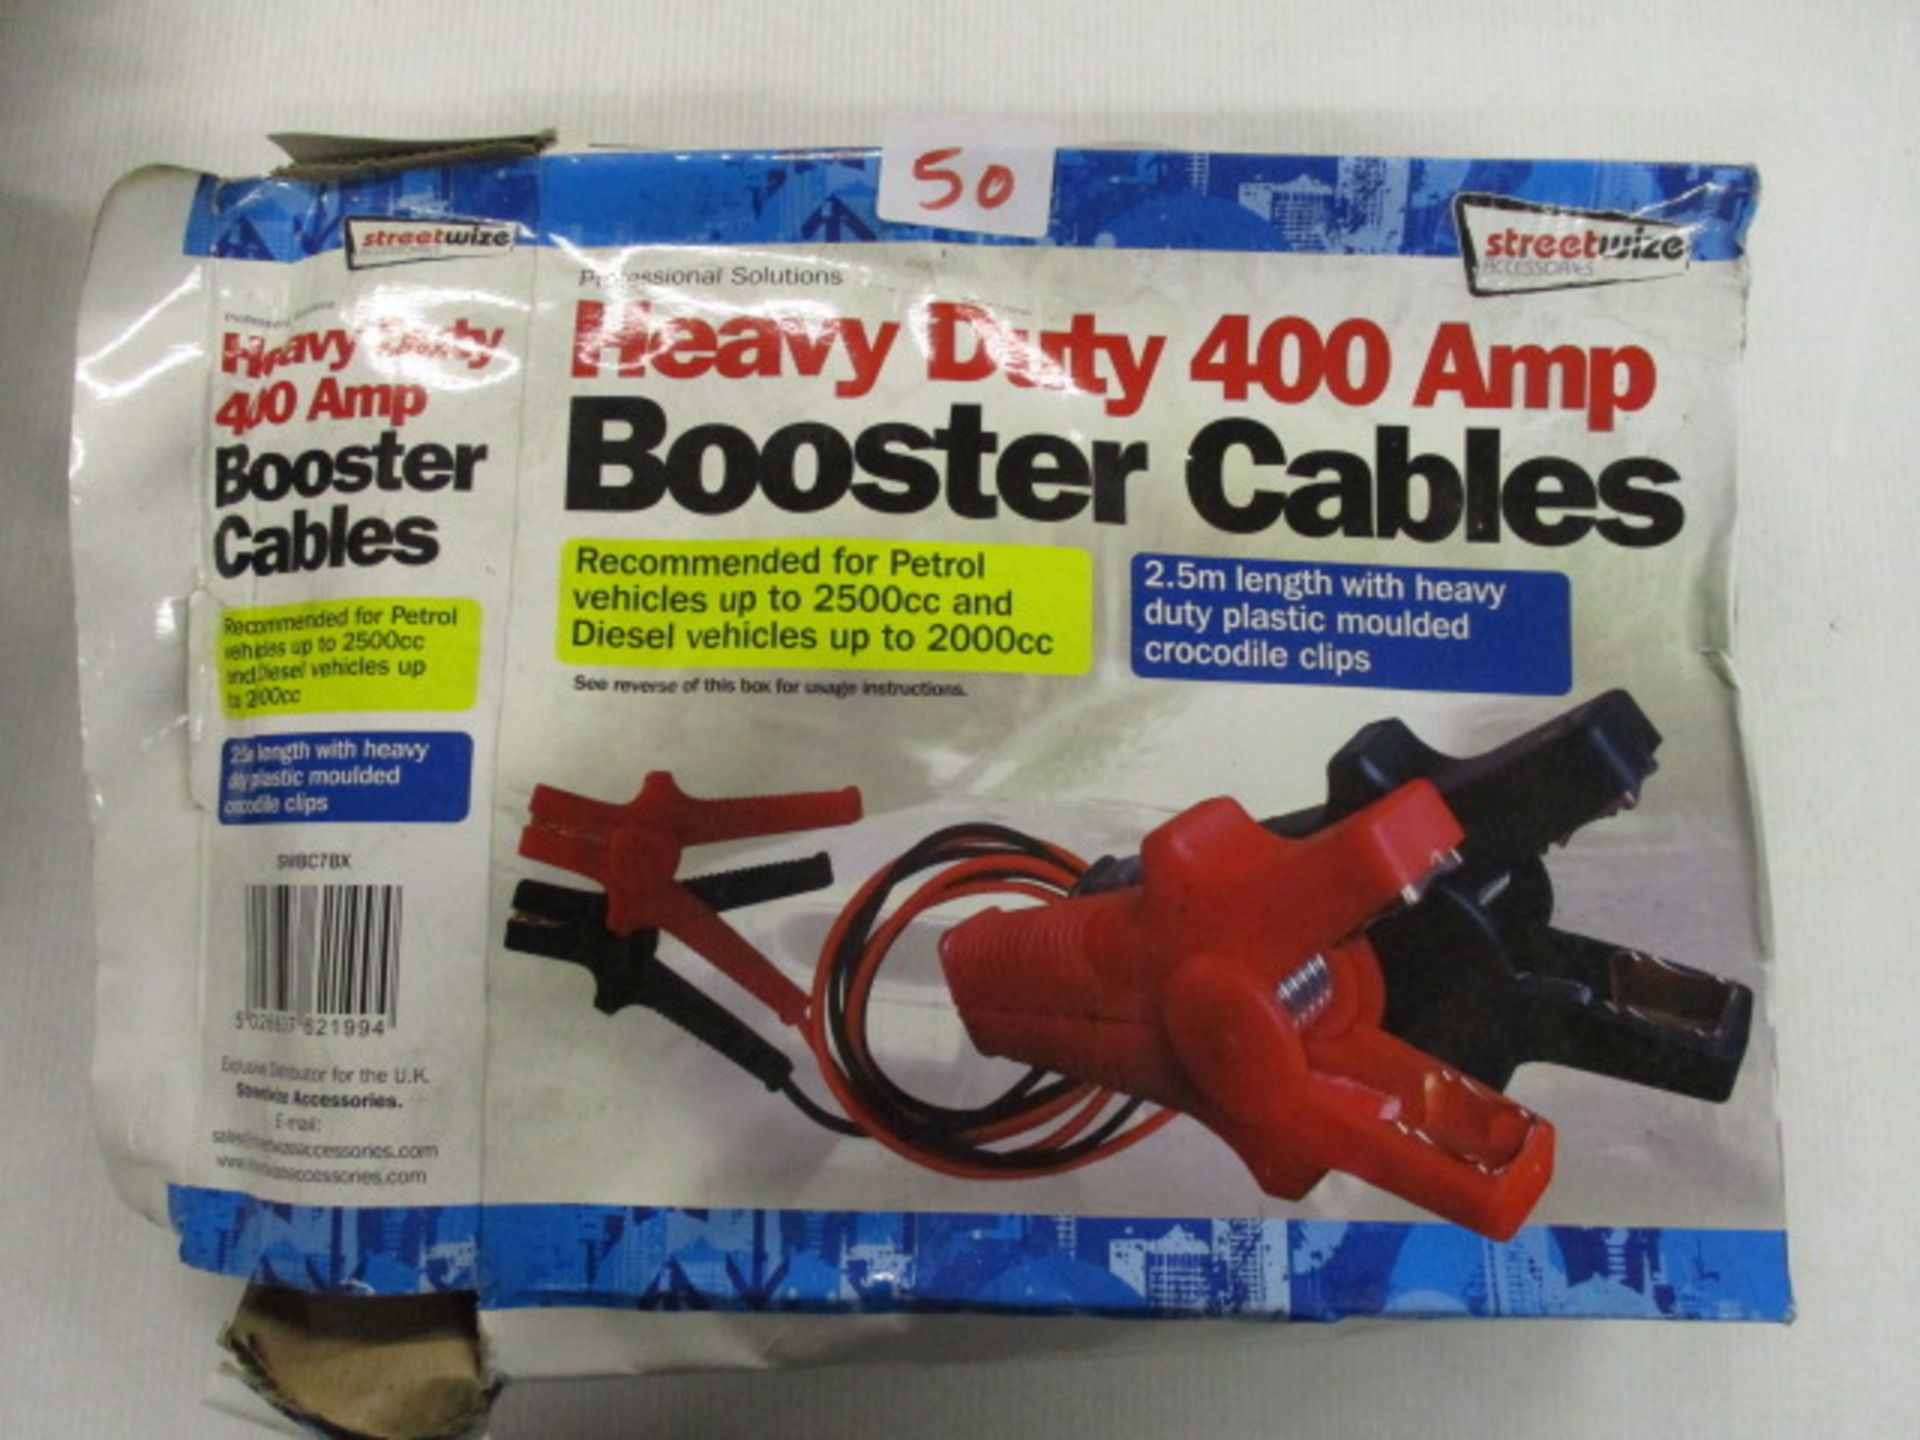 Heavy duty 400amp booster cables for petrol or diesel cars packaging may vary